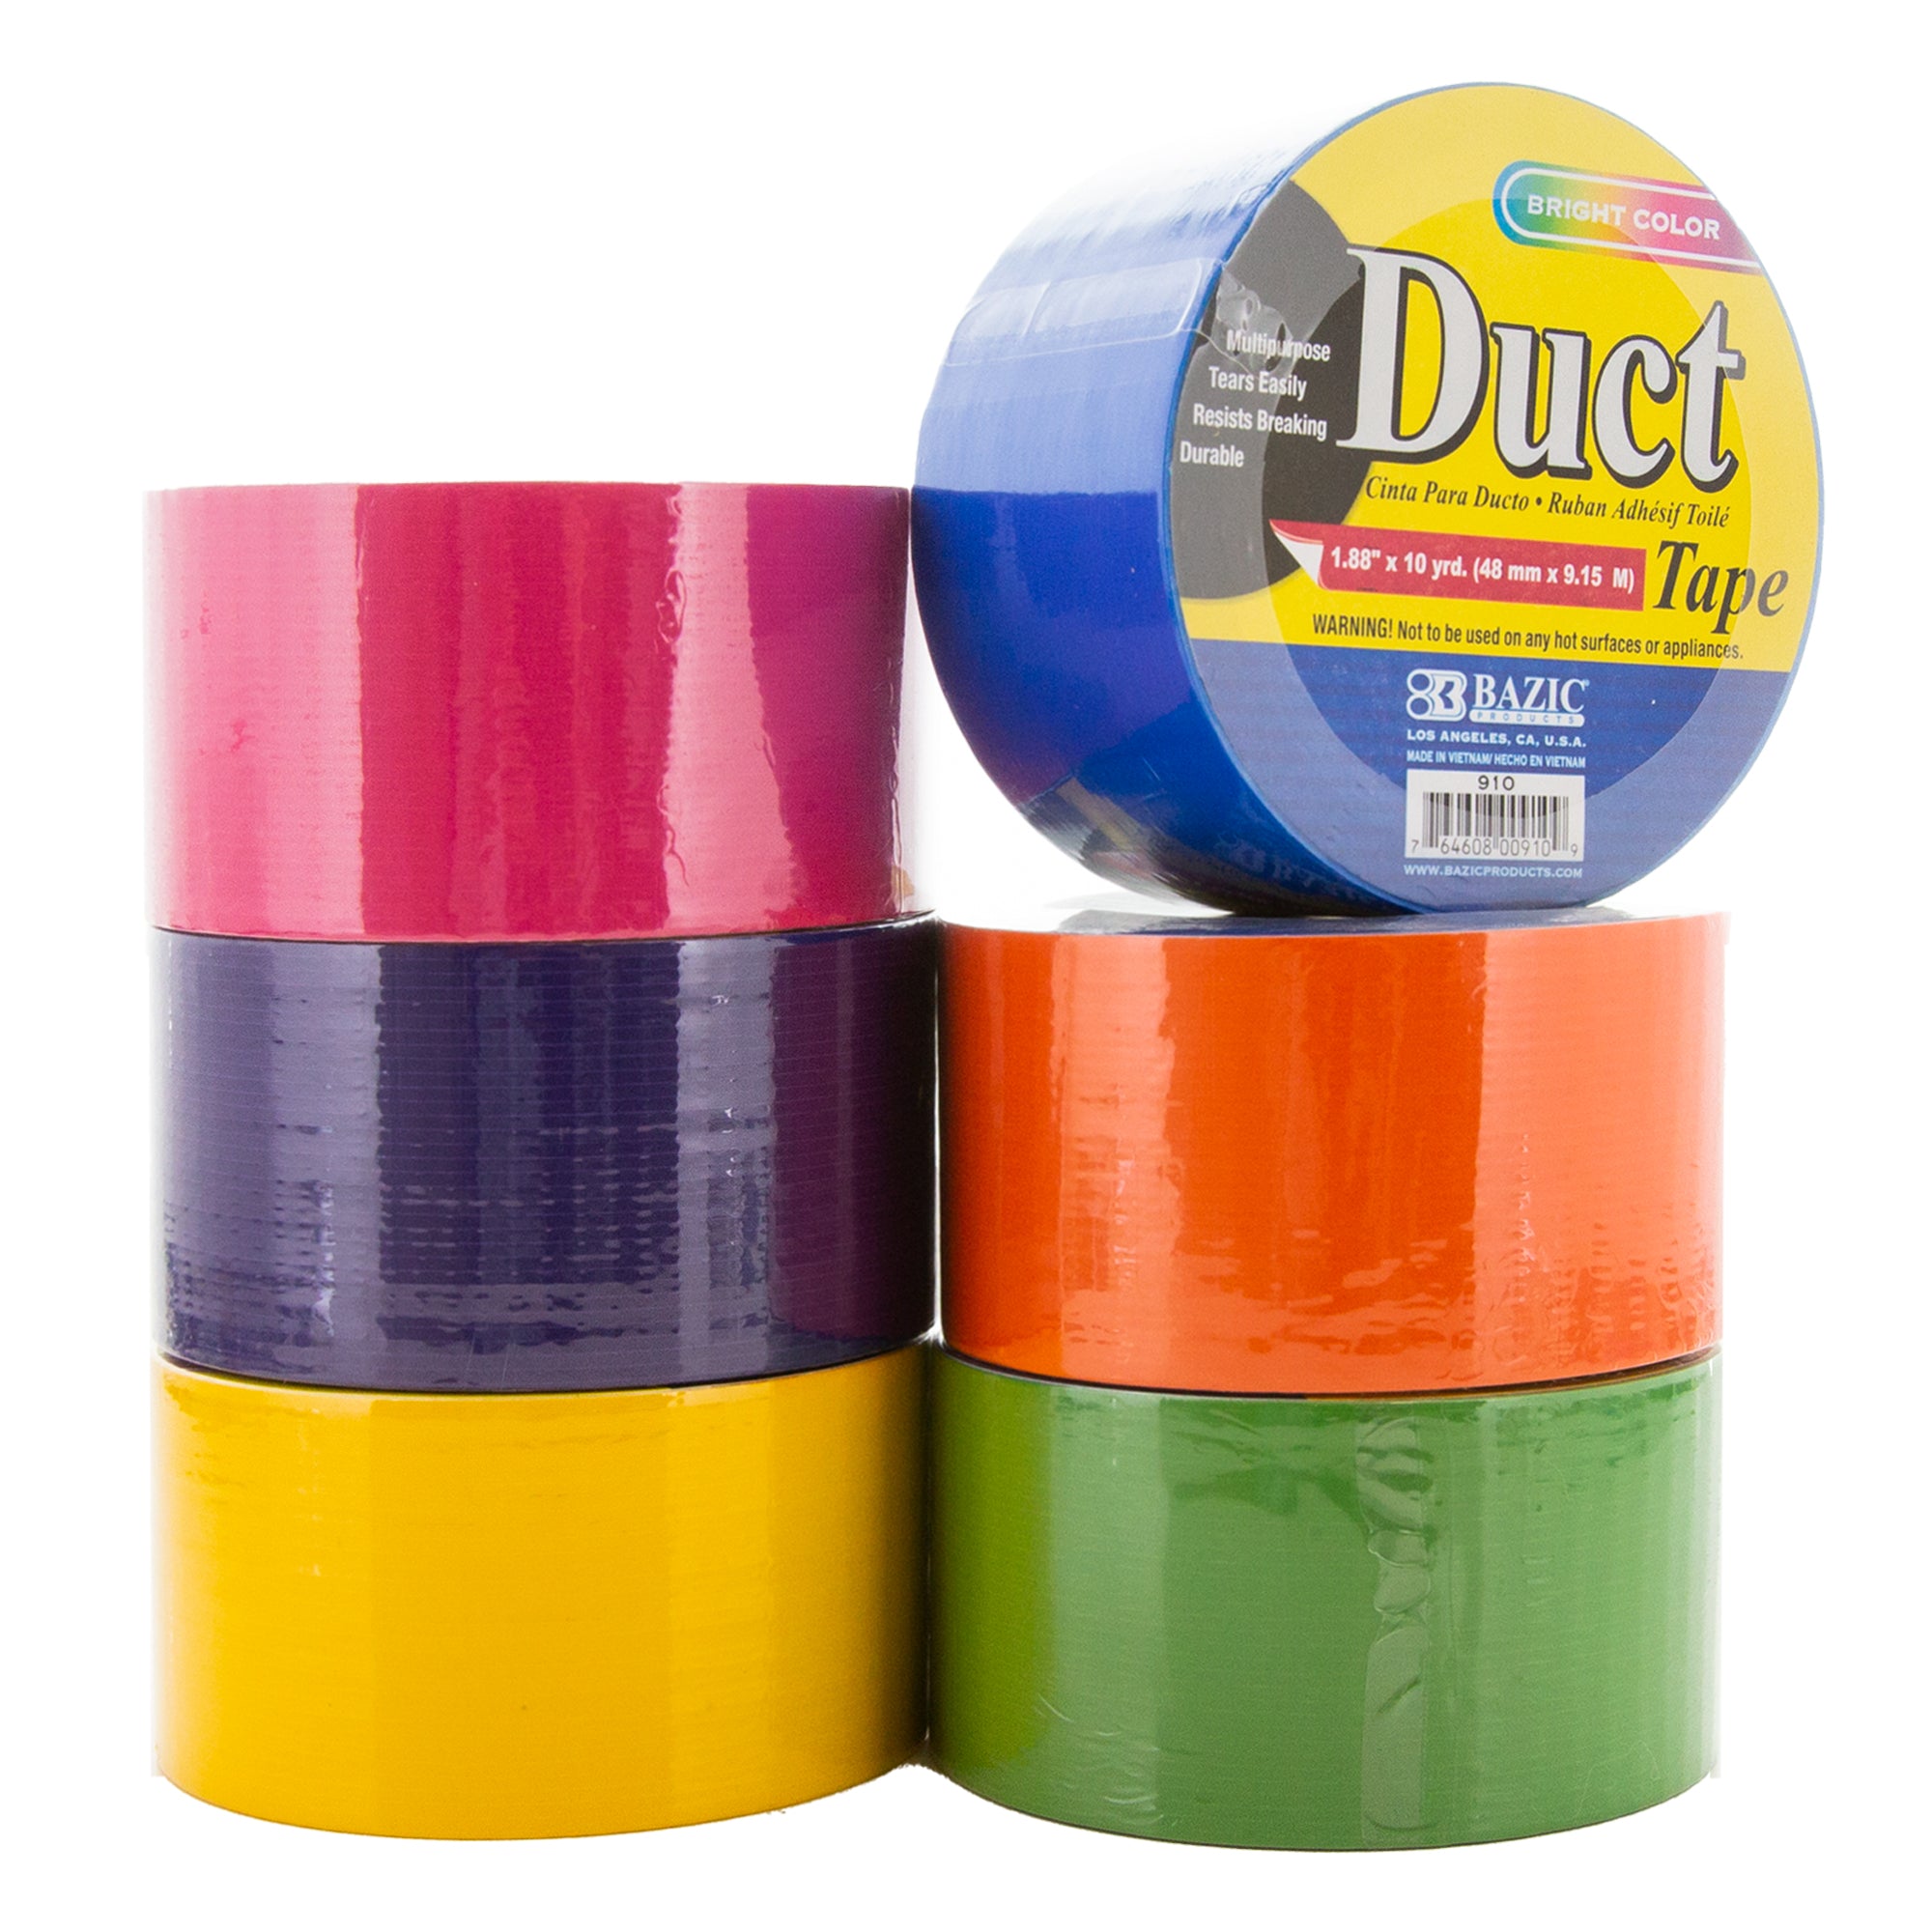 BAZIC 1.88 x 10 yrd. Assorted Fluorescent Colored Duct Tape